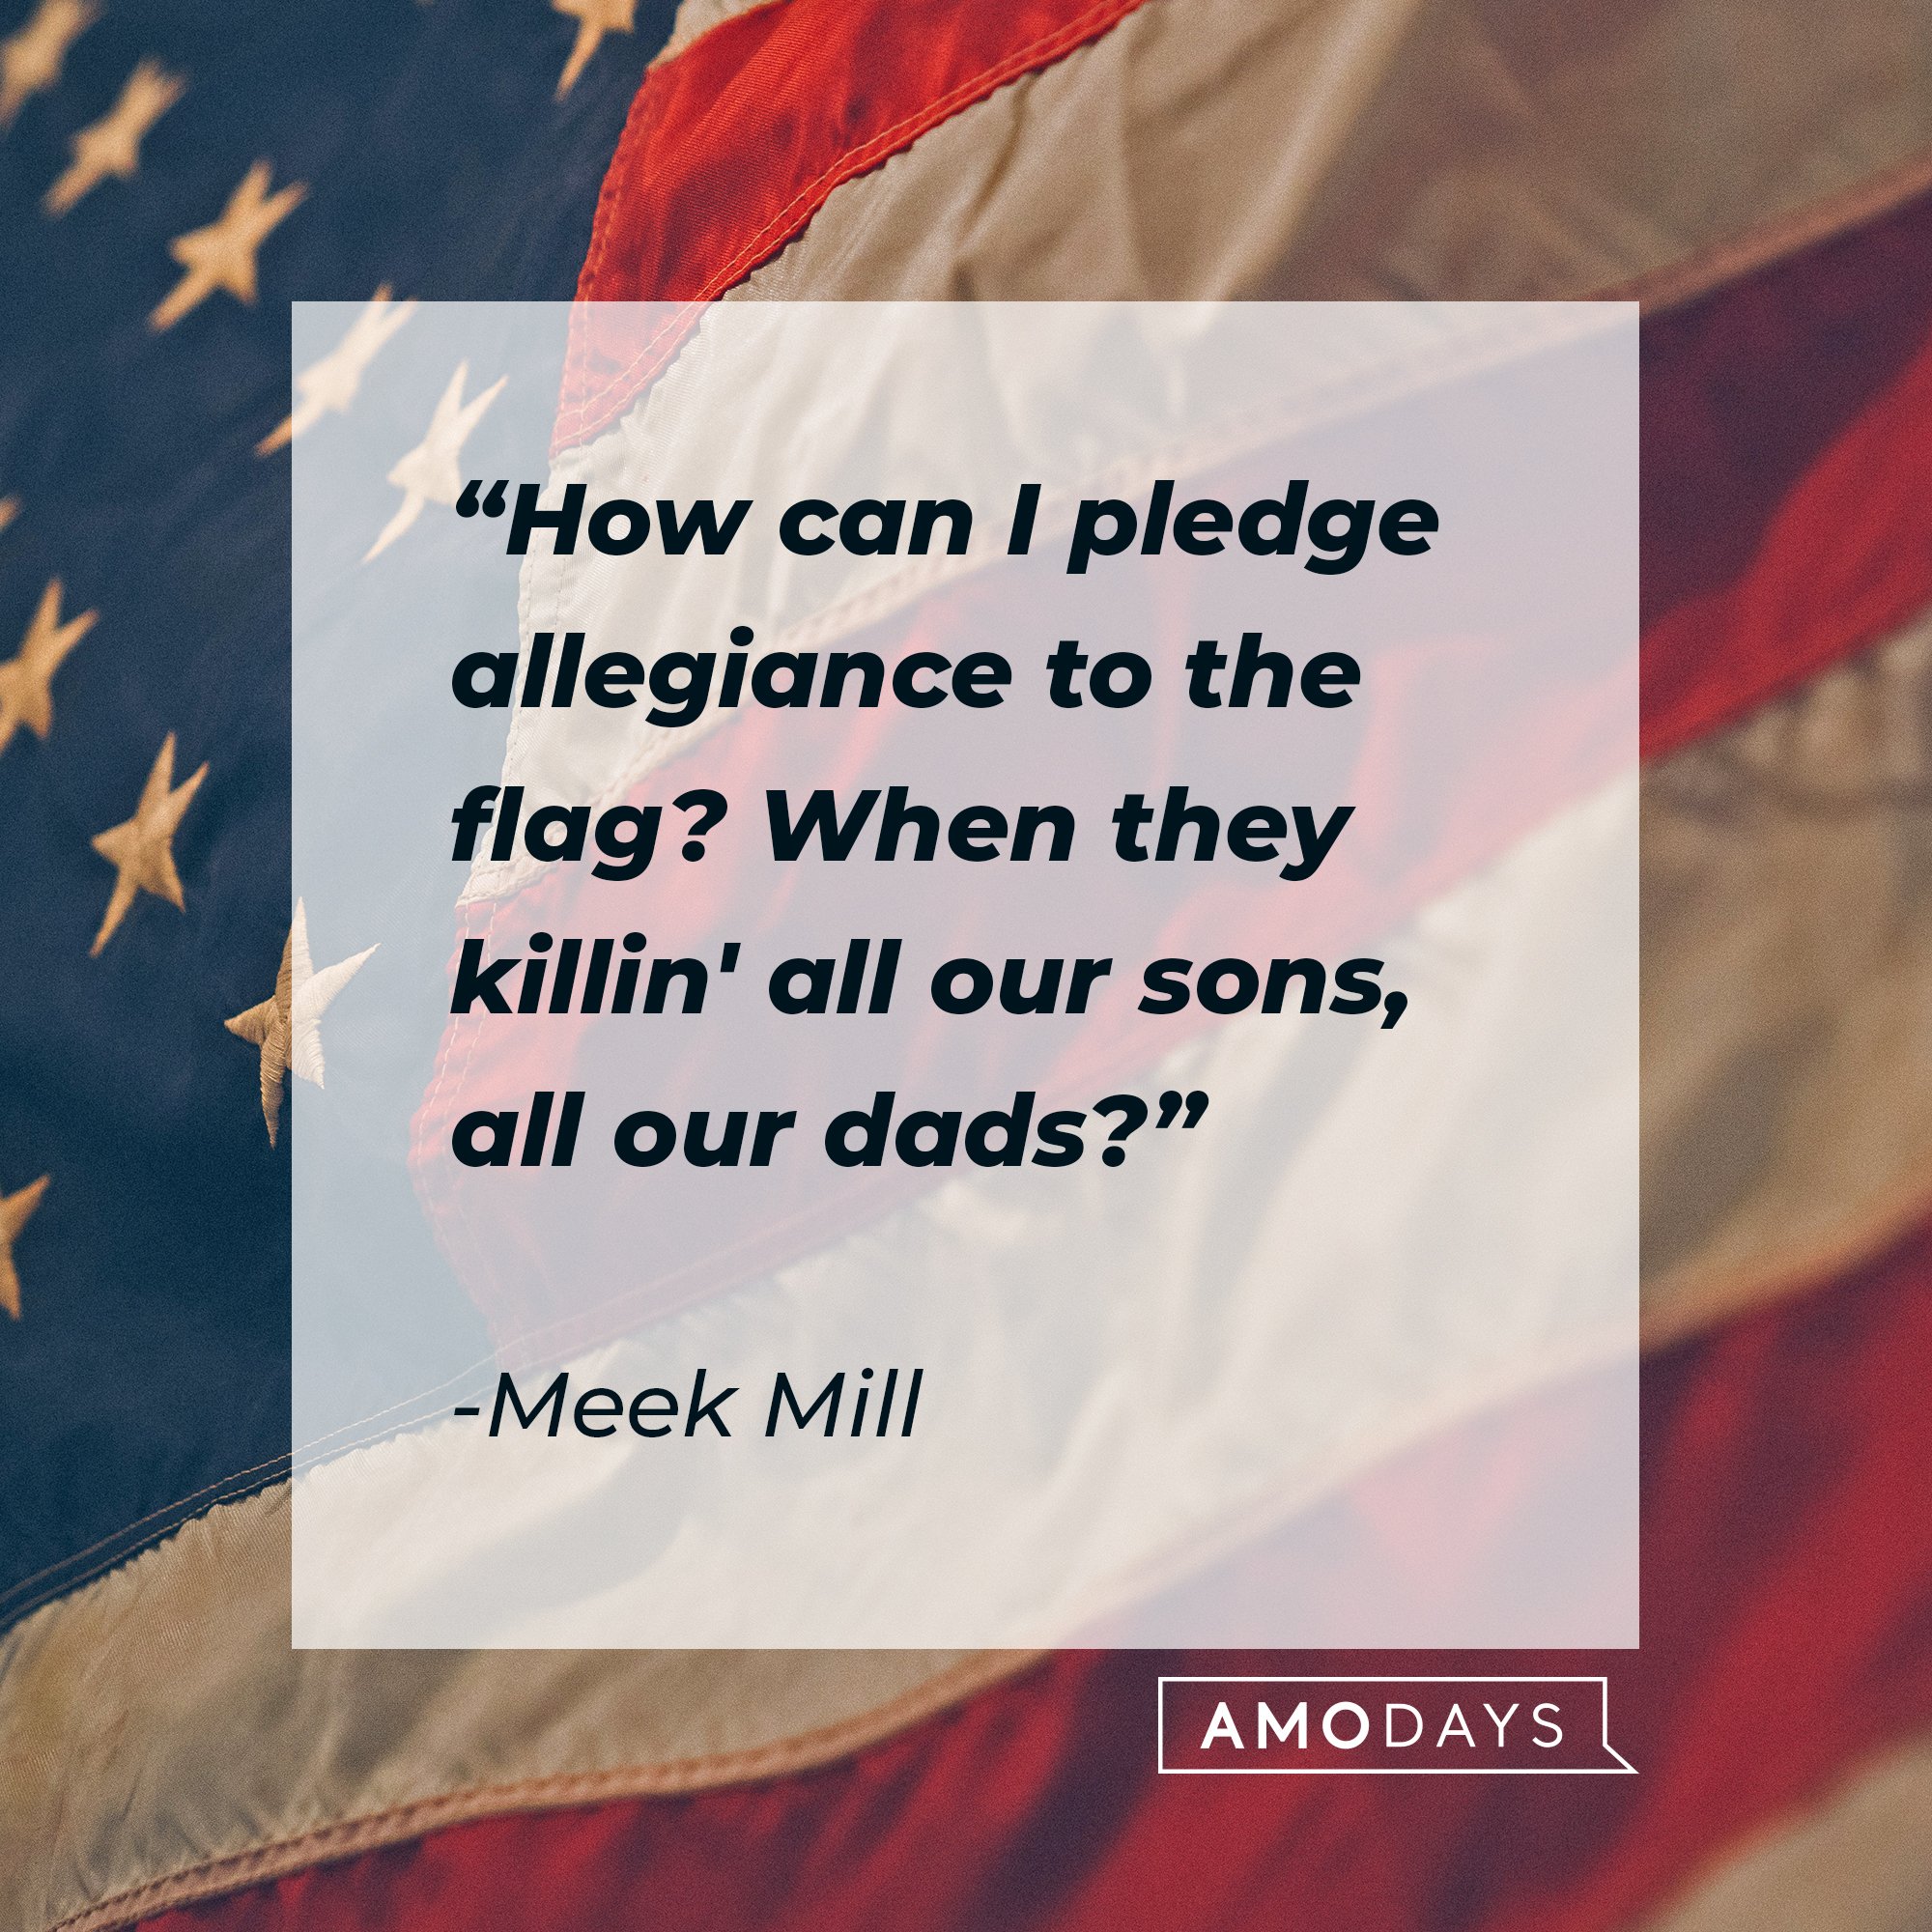 Meek Mill’s quote: "How can I pledge allegiance to the flag? When they killin' all our sons, all our dads?" | Image: AmoDays 